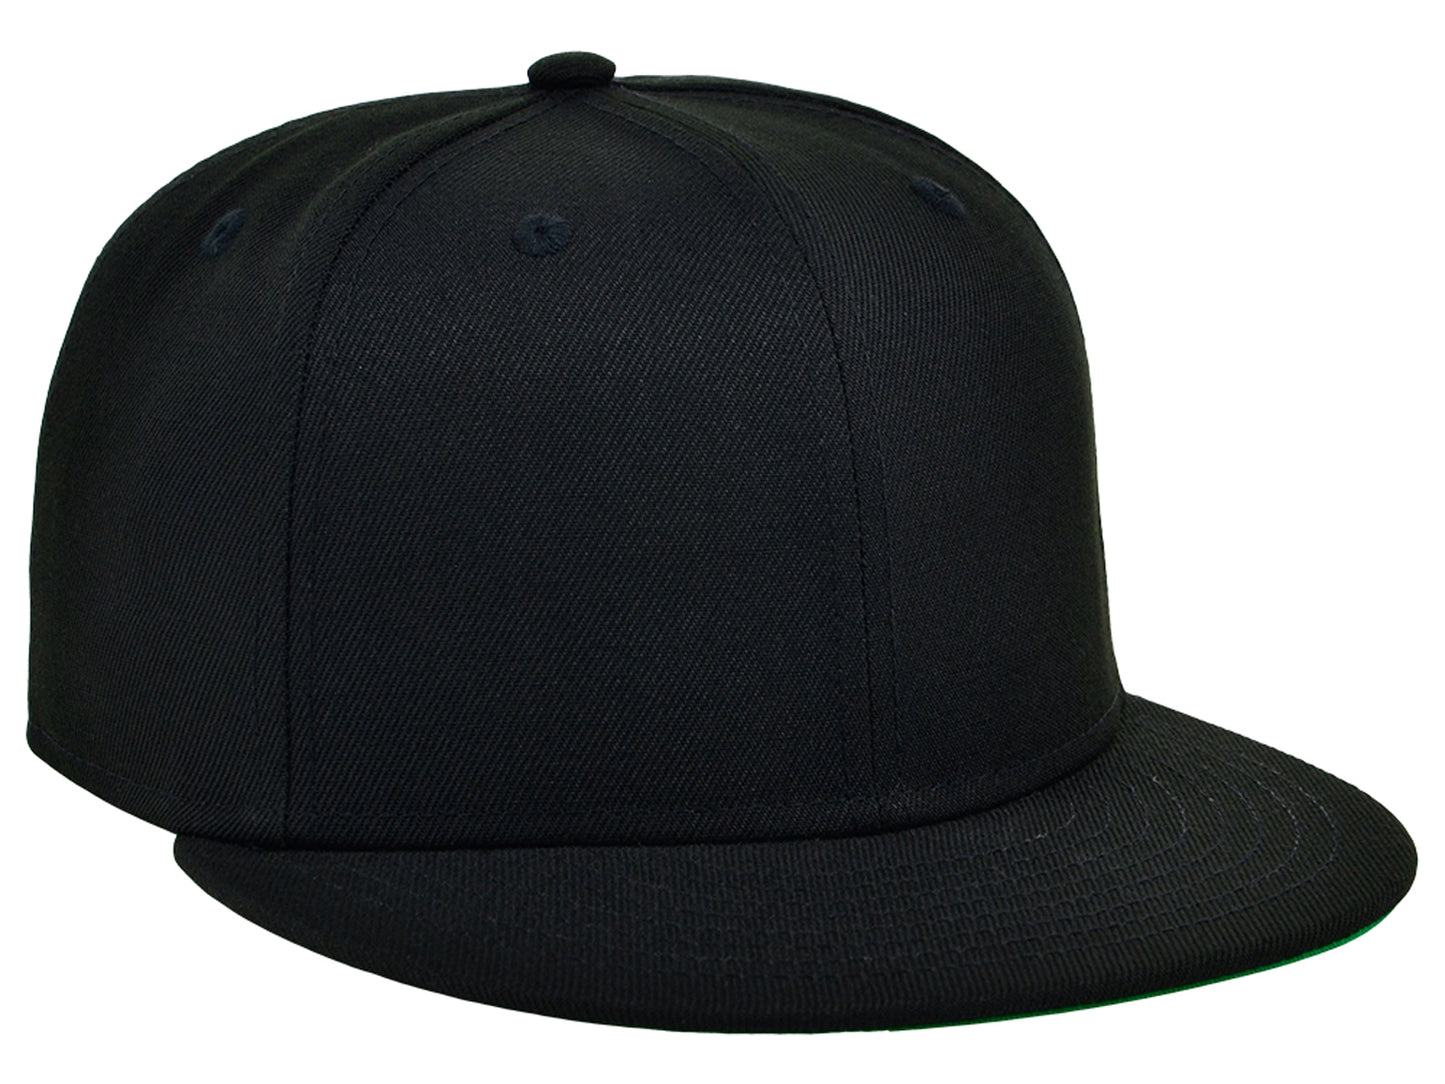 Crowns By Lids Full Court Fitted UV Cap - Black/Green